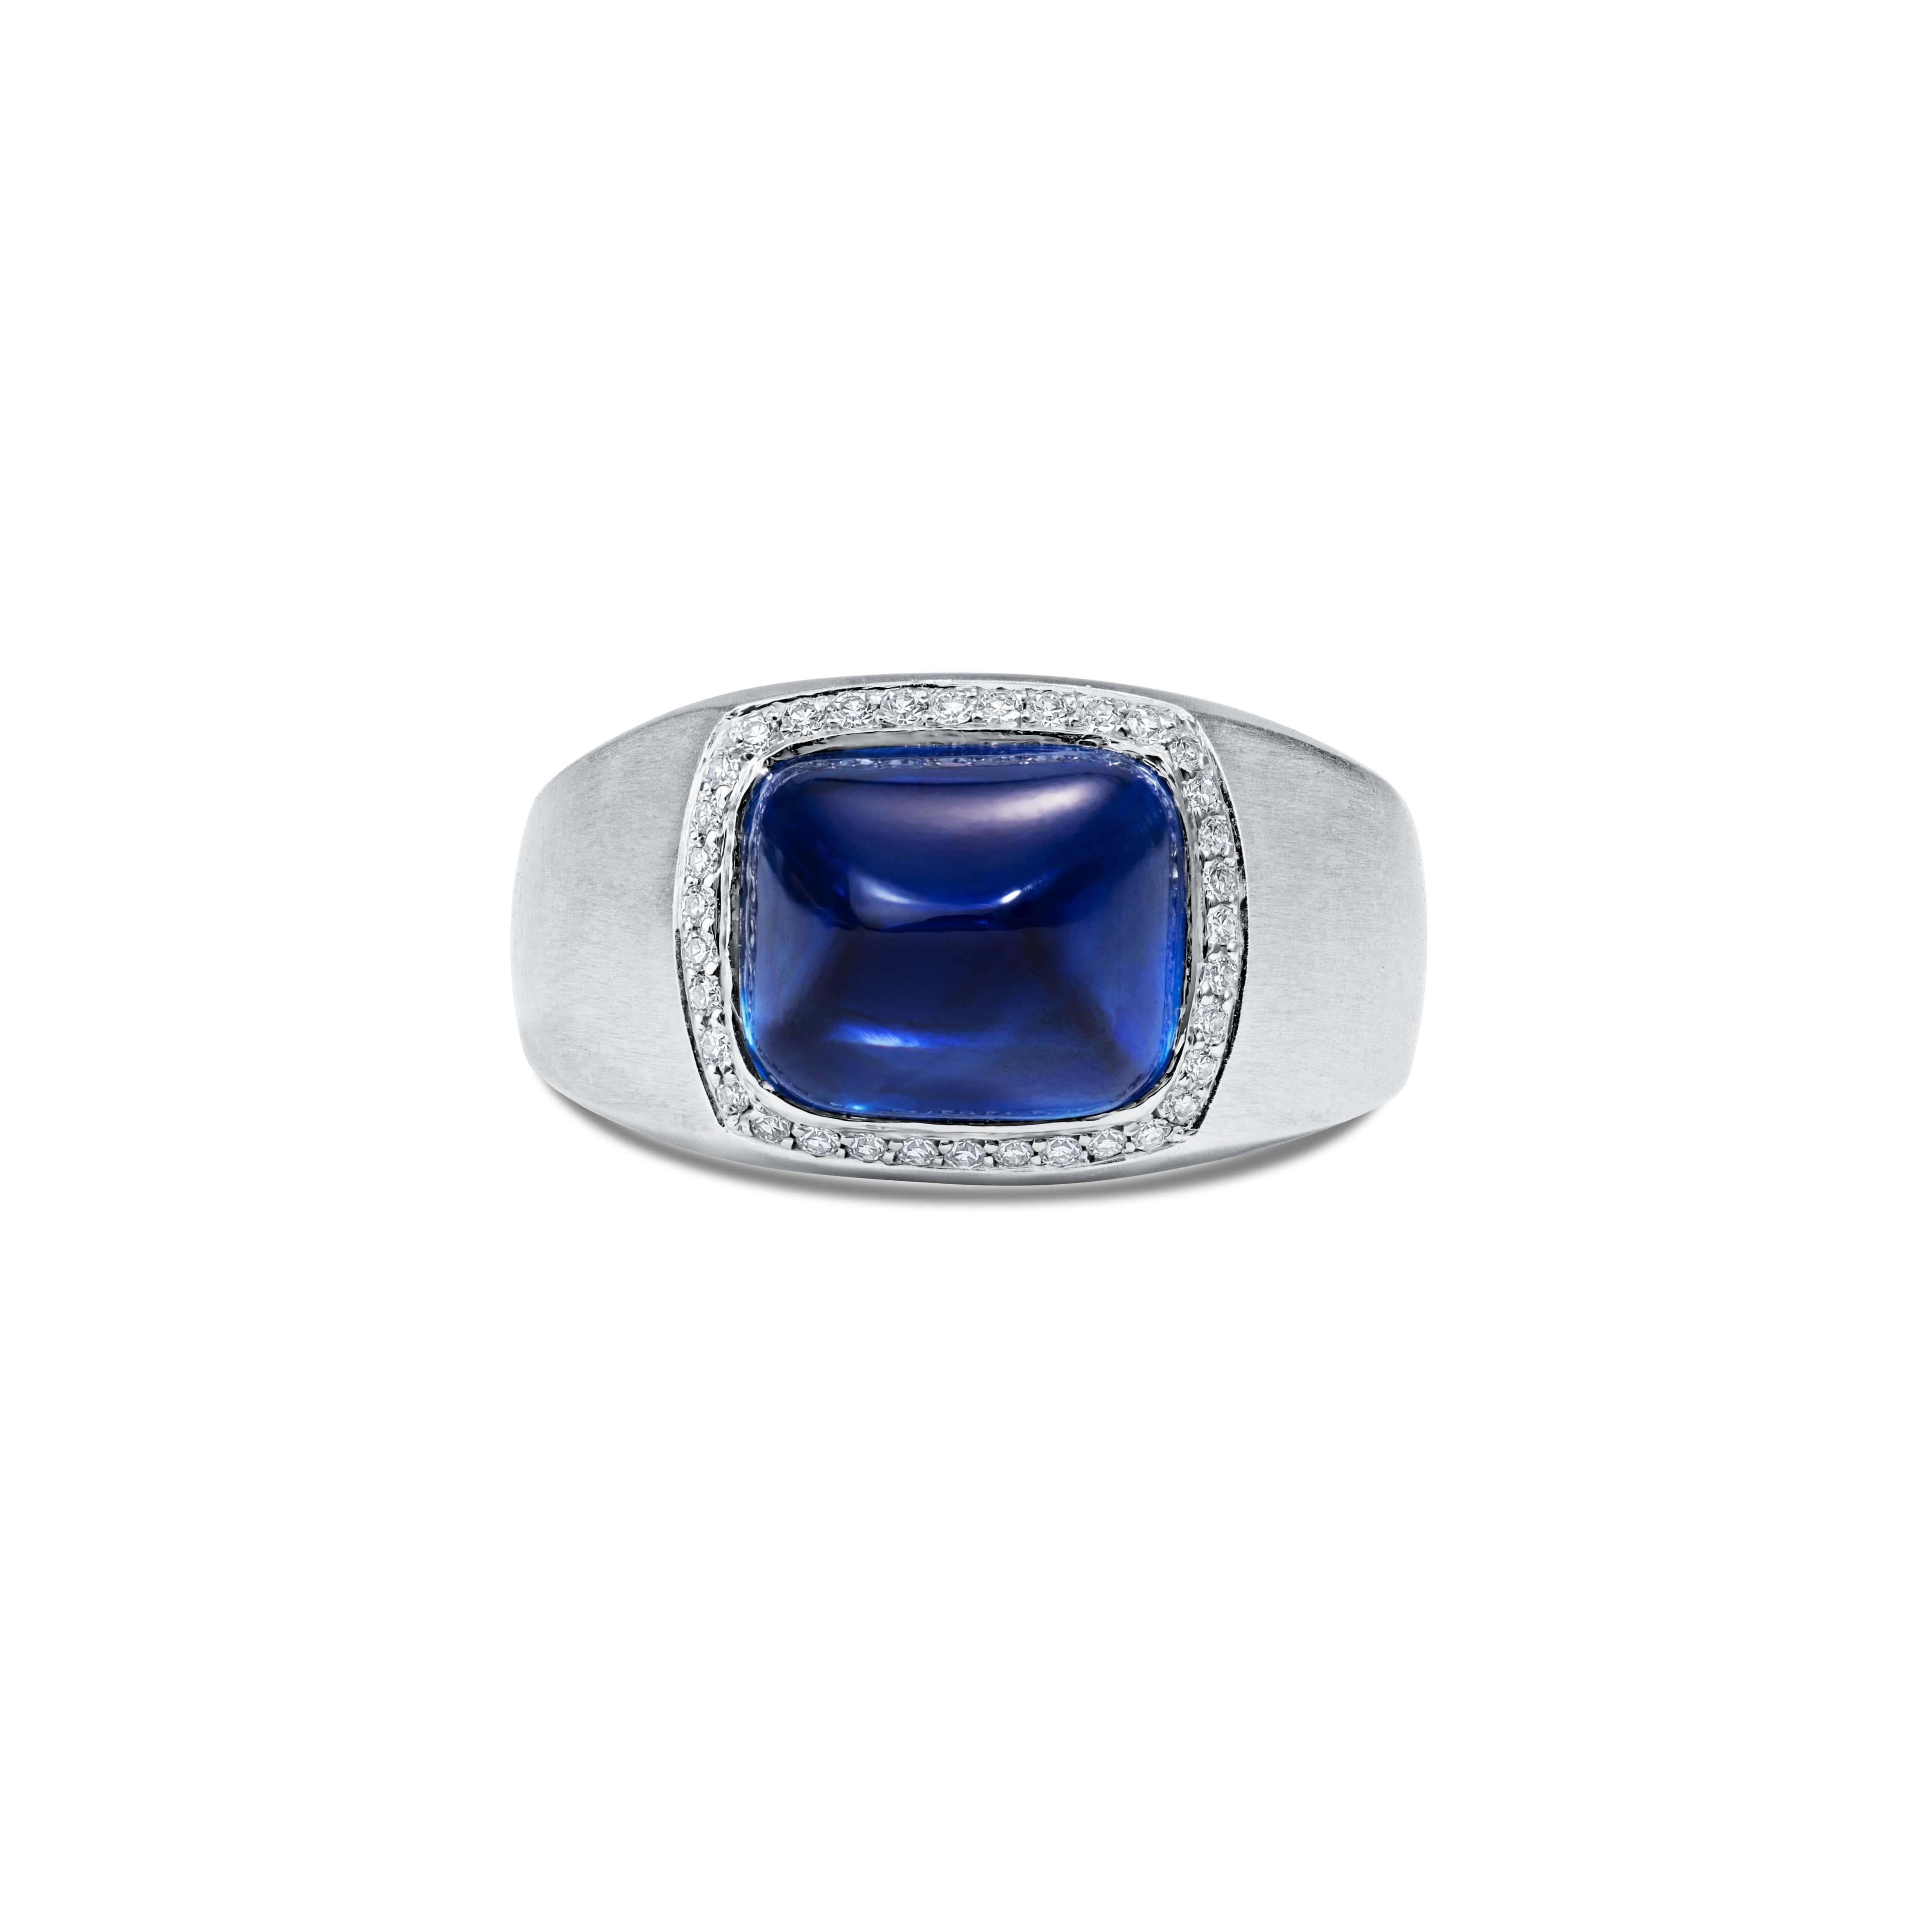 David Morris Platinum 12.15 Carat Blue Sapphire Cocktail Ring In New Condition For Sale In London, GB